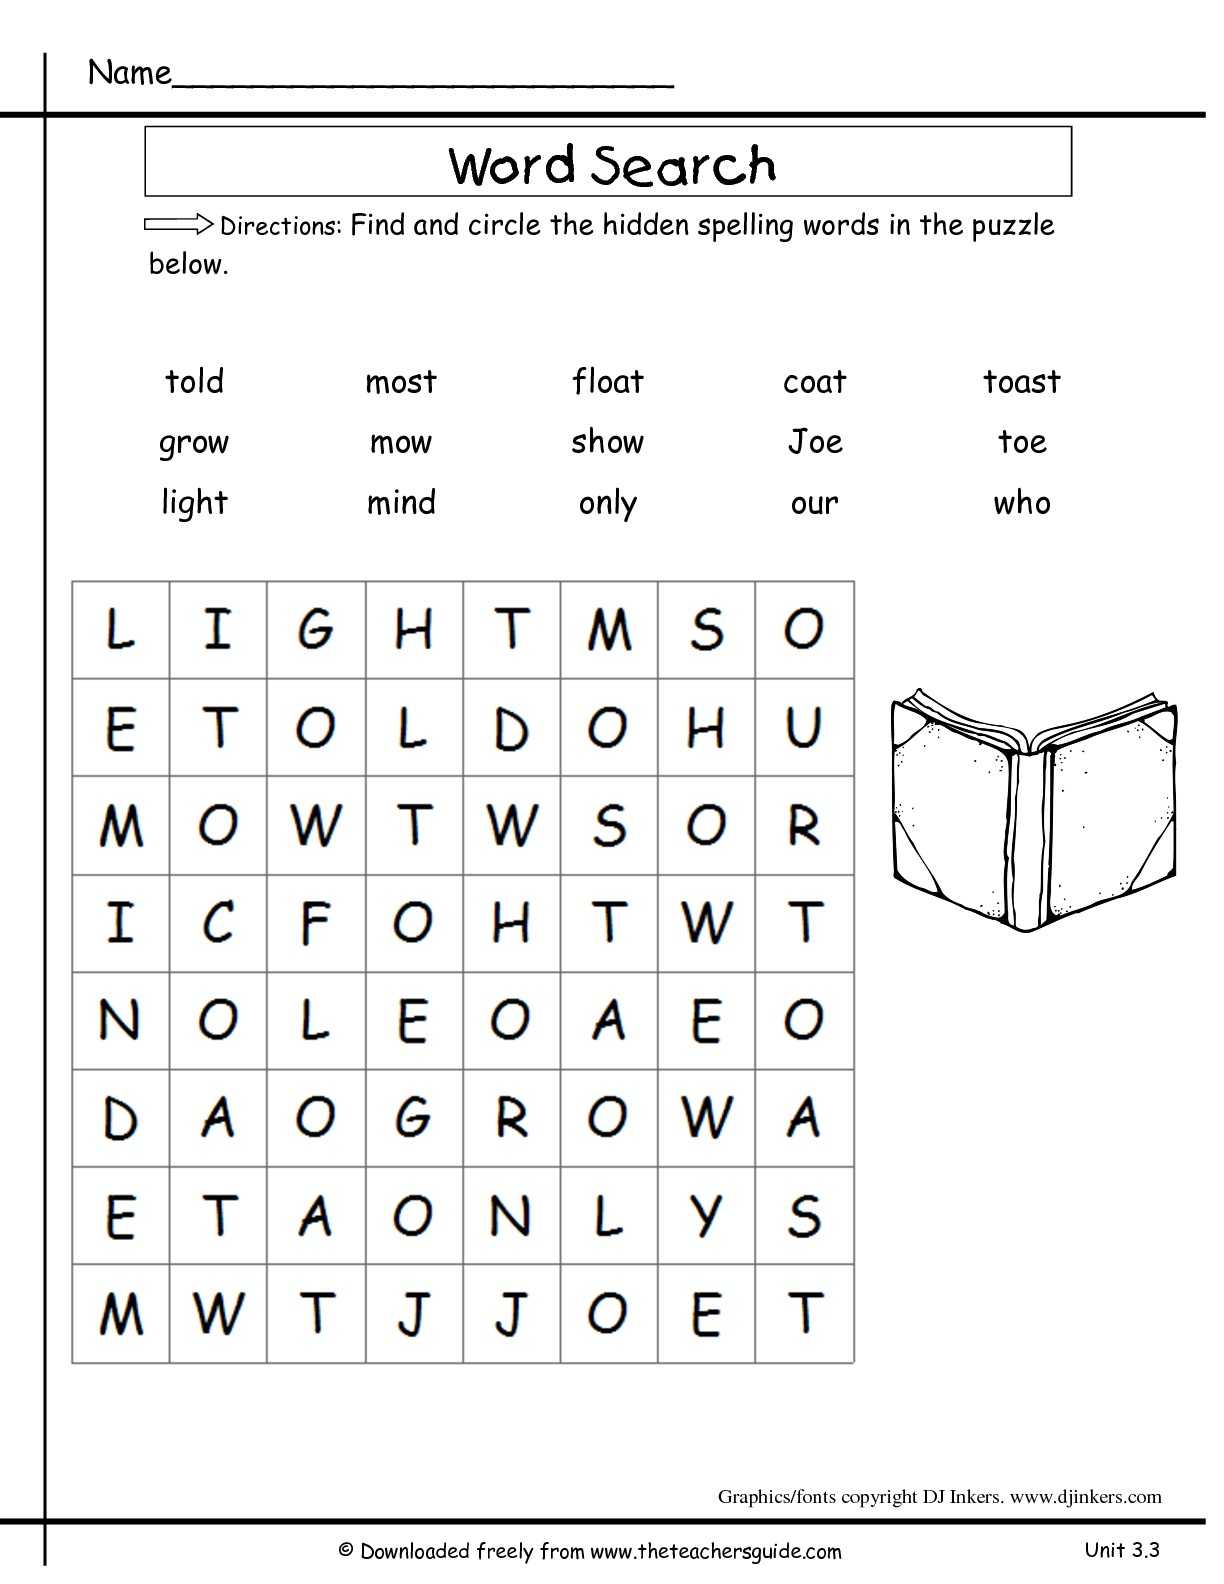 Free 1st Grade Comprehension Worksheets as Well as Kids Second Grade Reading Prehension Sheets Wonders Second